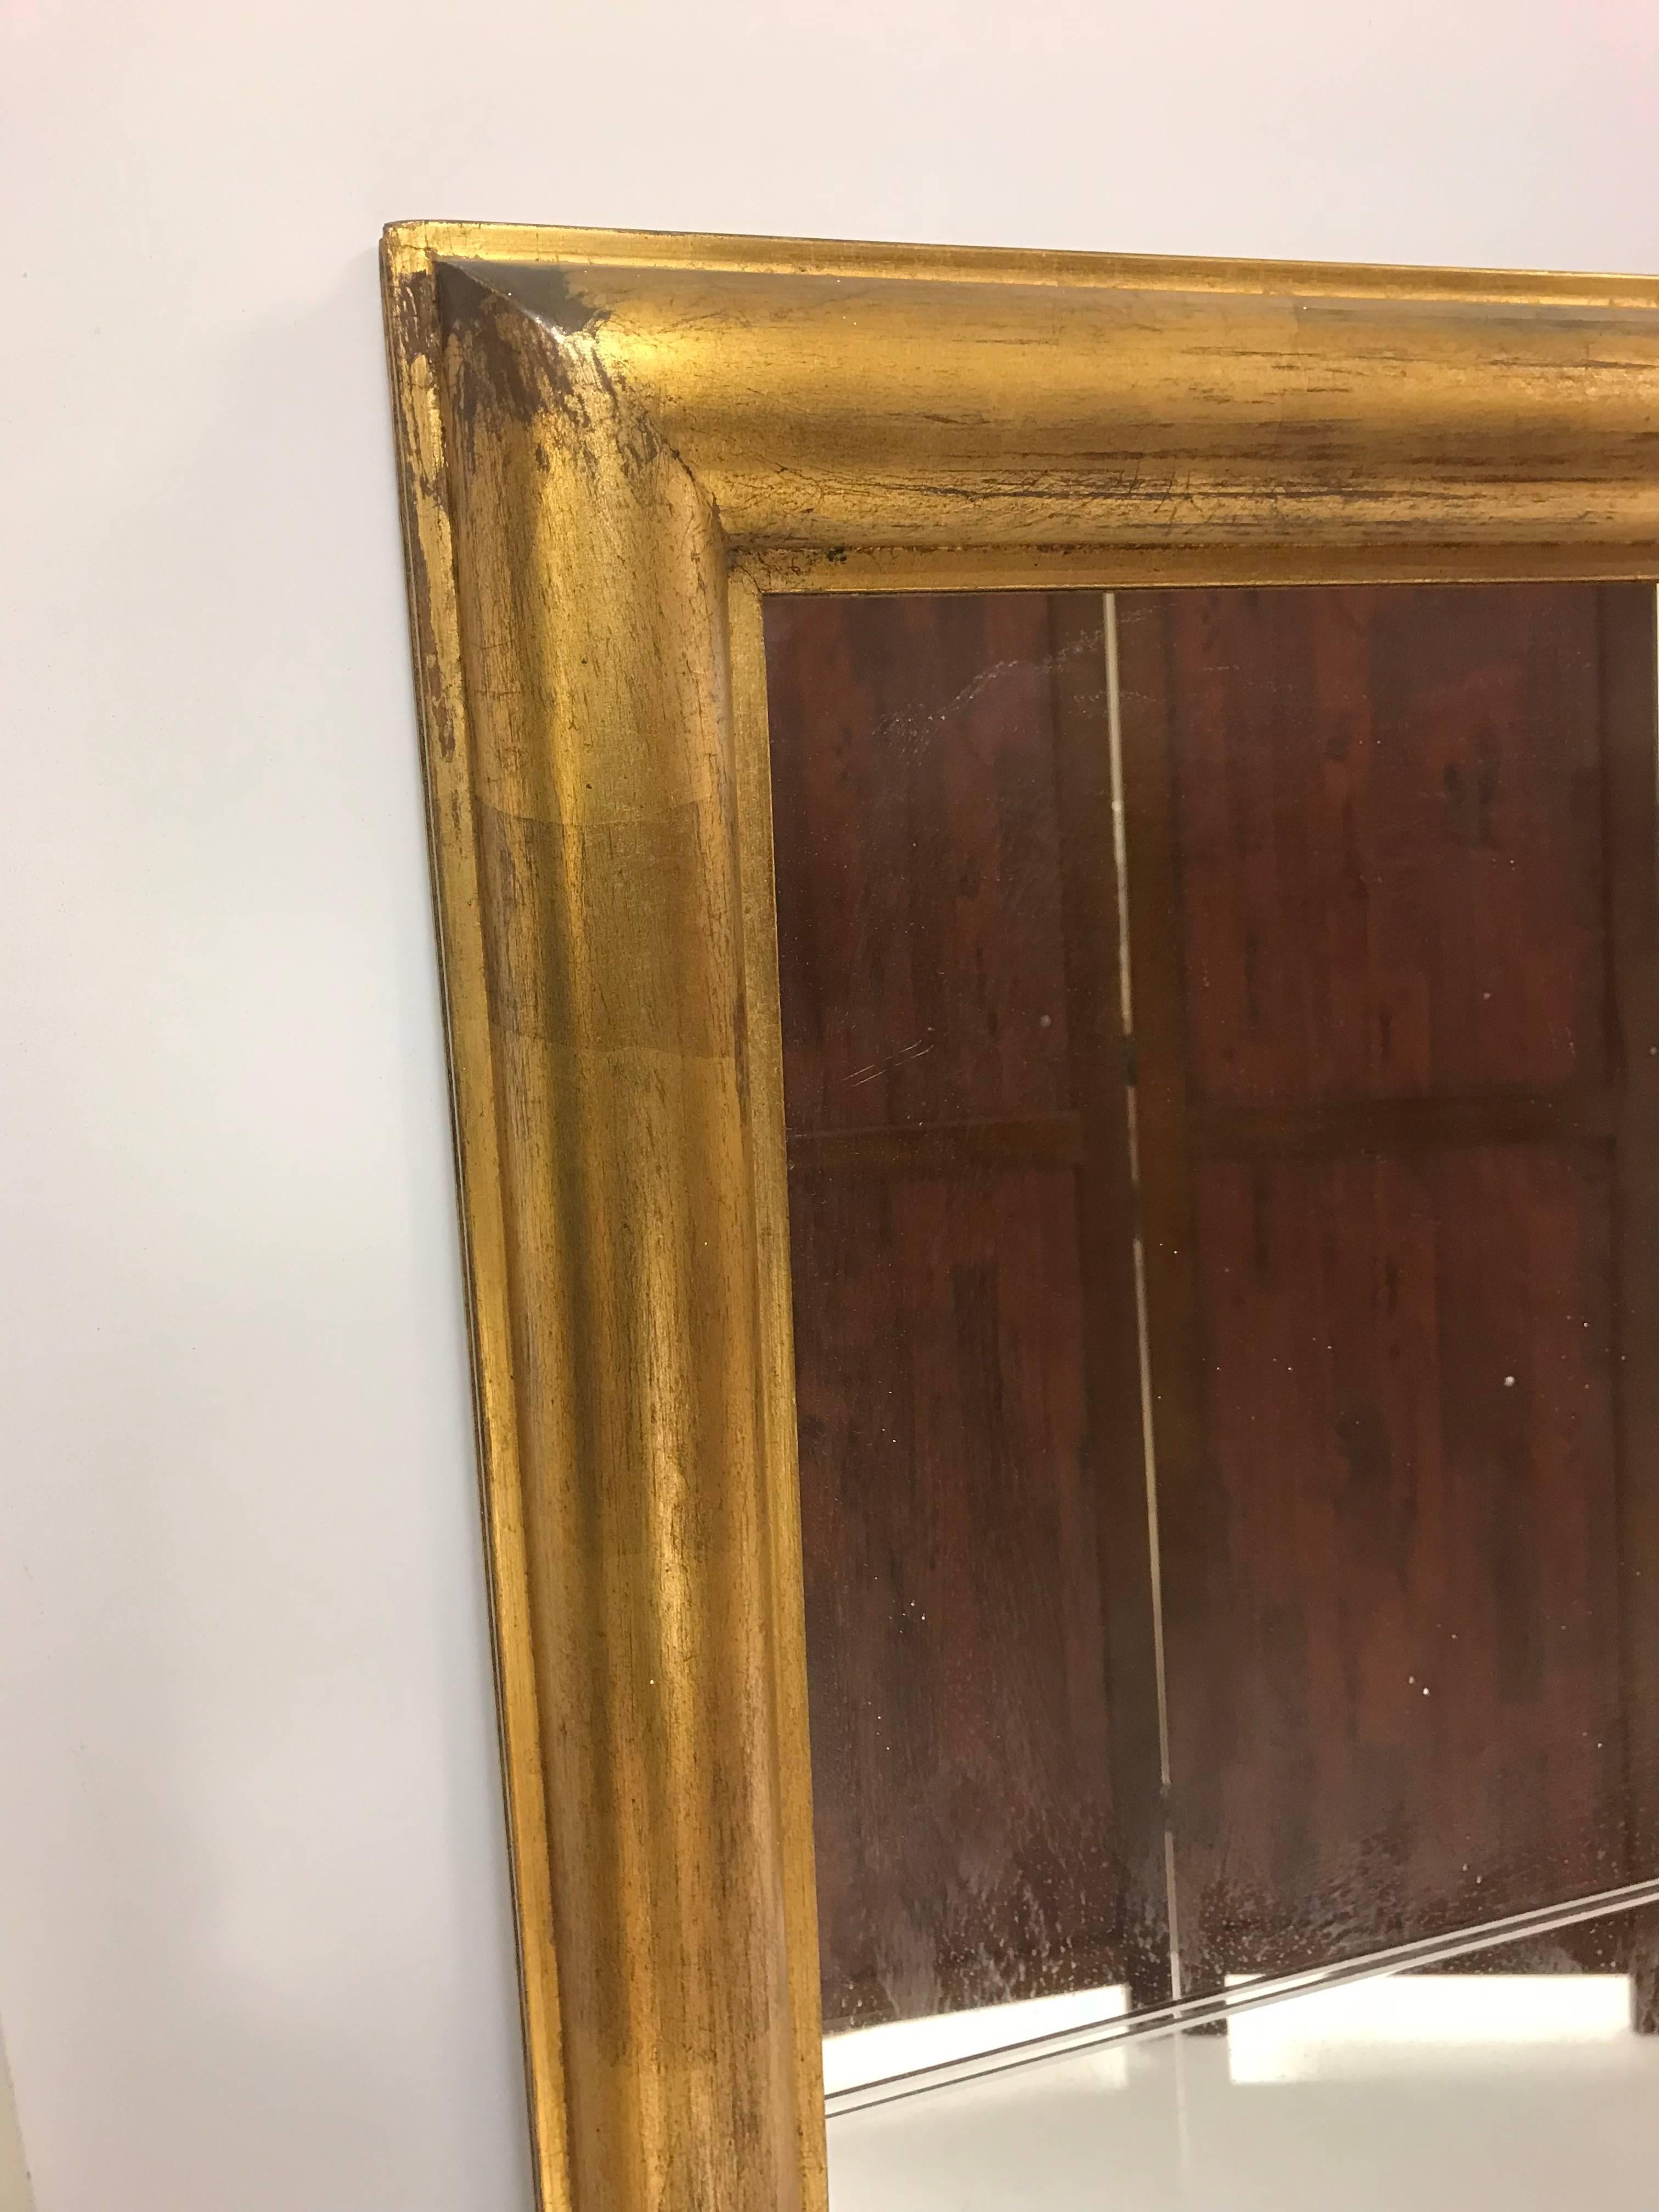 Large Tommi Parzinger mirror. This mirror is divided into nine sections with deep etching. Tommi Parzinger originals. Giltwood frame with brass ring and nice patina.